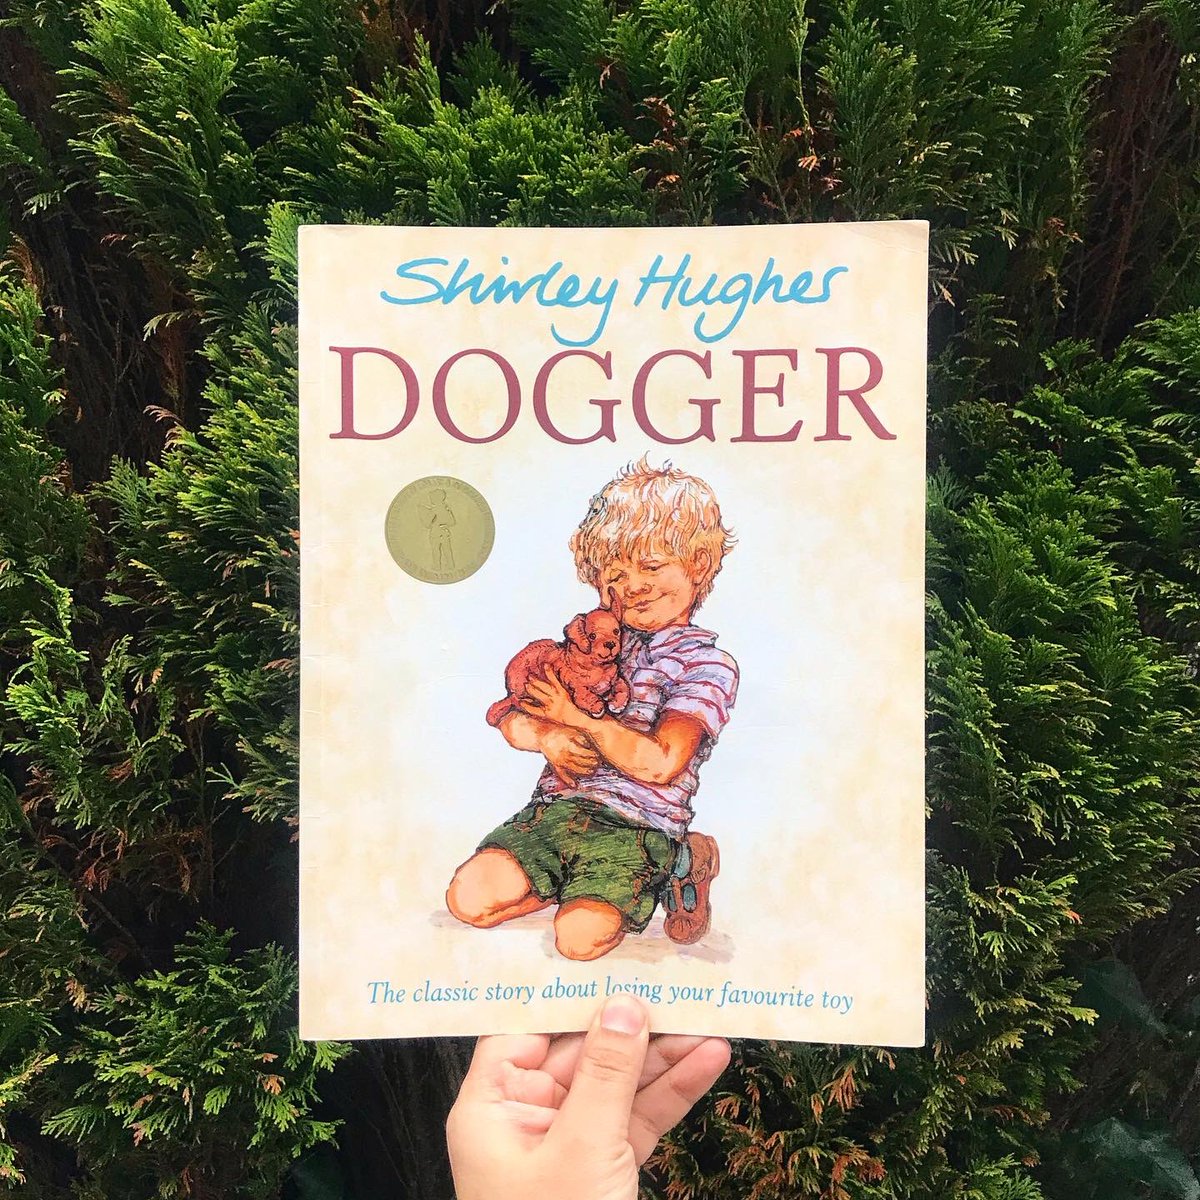 Thank you for creating many fabulous books and for bringing so many stories to life with your superb illustrations. Shirley Hughes 1927-2022.
.
.
.#ShirleyHughes #ClassicBooks #booksaboutfamily #favouritebook #childhoodfavourite #childhoodfavorite